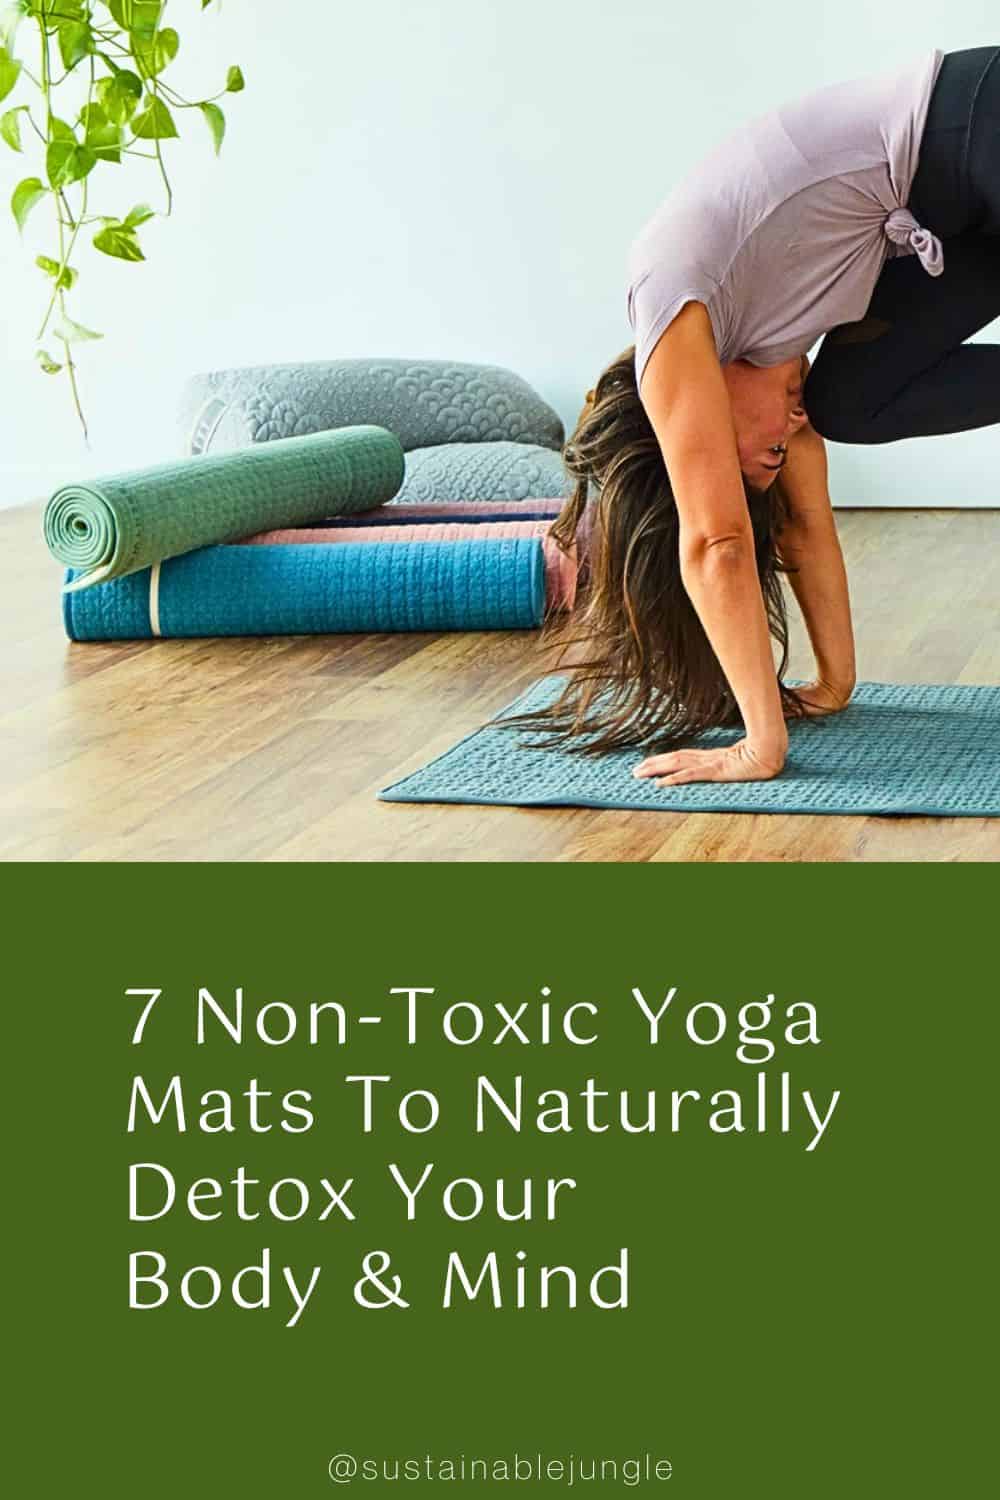 7 Non-Toxic Yoga Mats To Naturally Detox Your Body & Mind Image by Brentwood Home #nontoxicyogamats #naturalyogamats #naturalrubberyogamat #bestnontoxicyogamat #affordablenontoxicyogamat #sustainablejungle